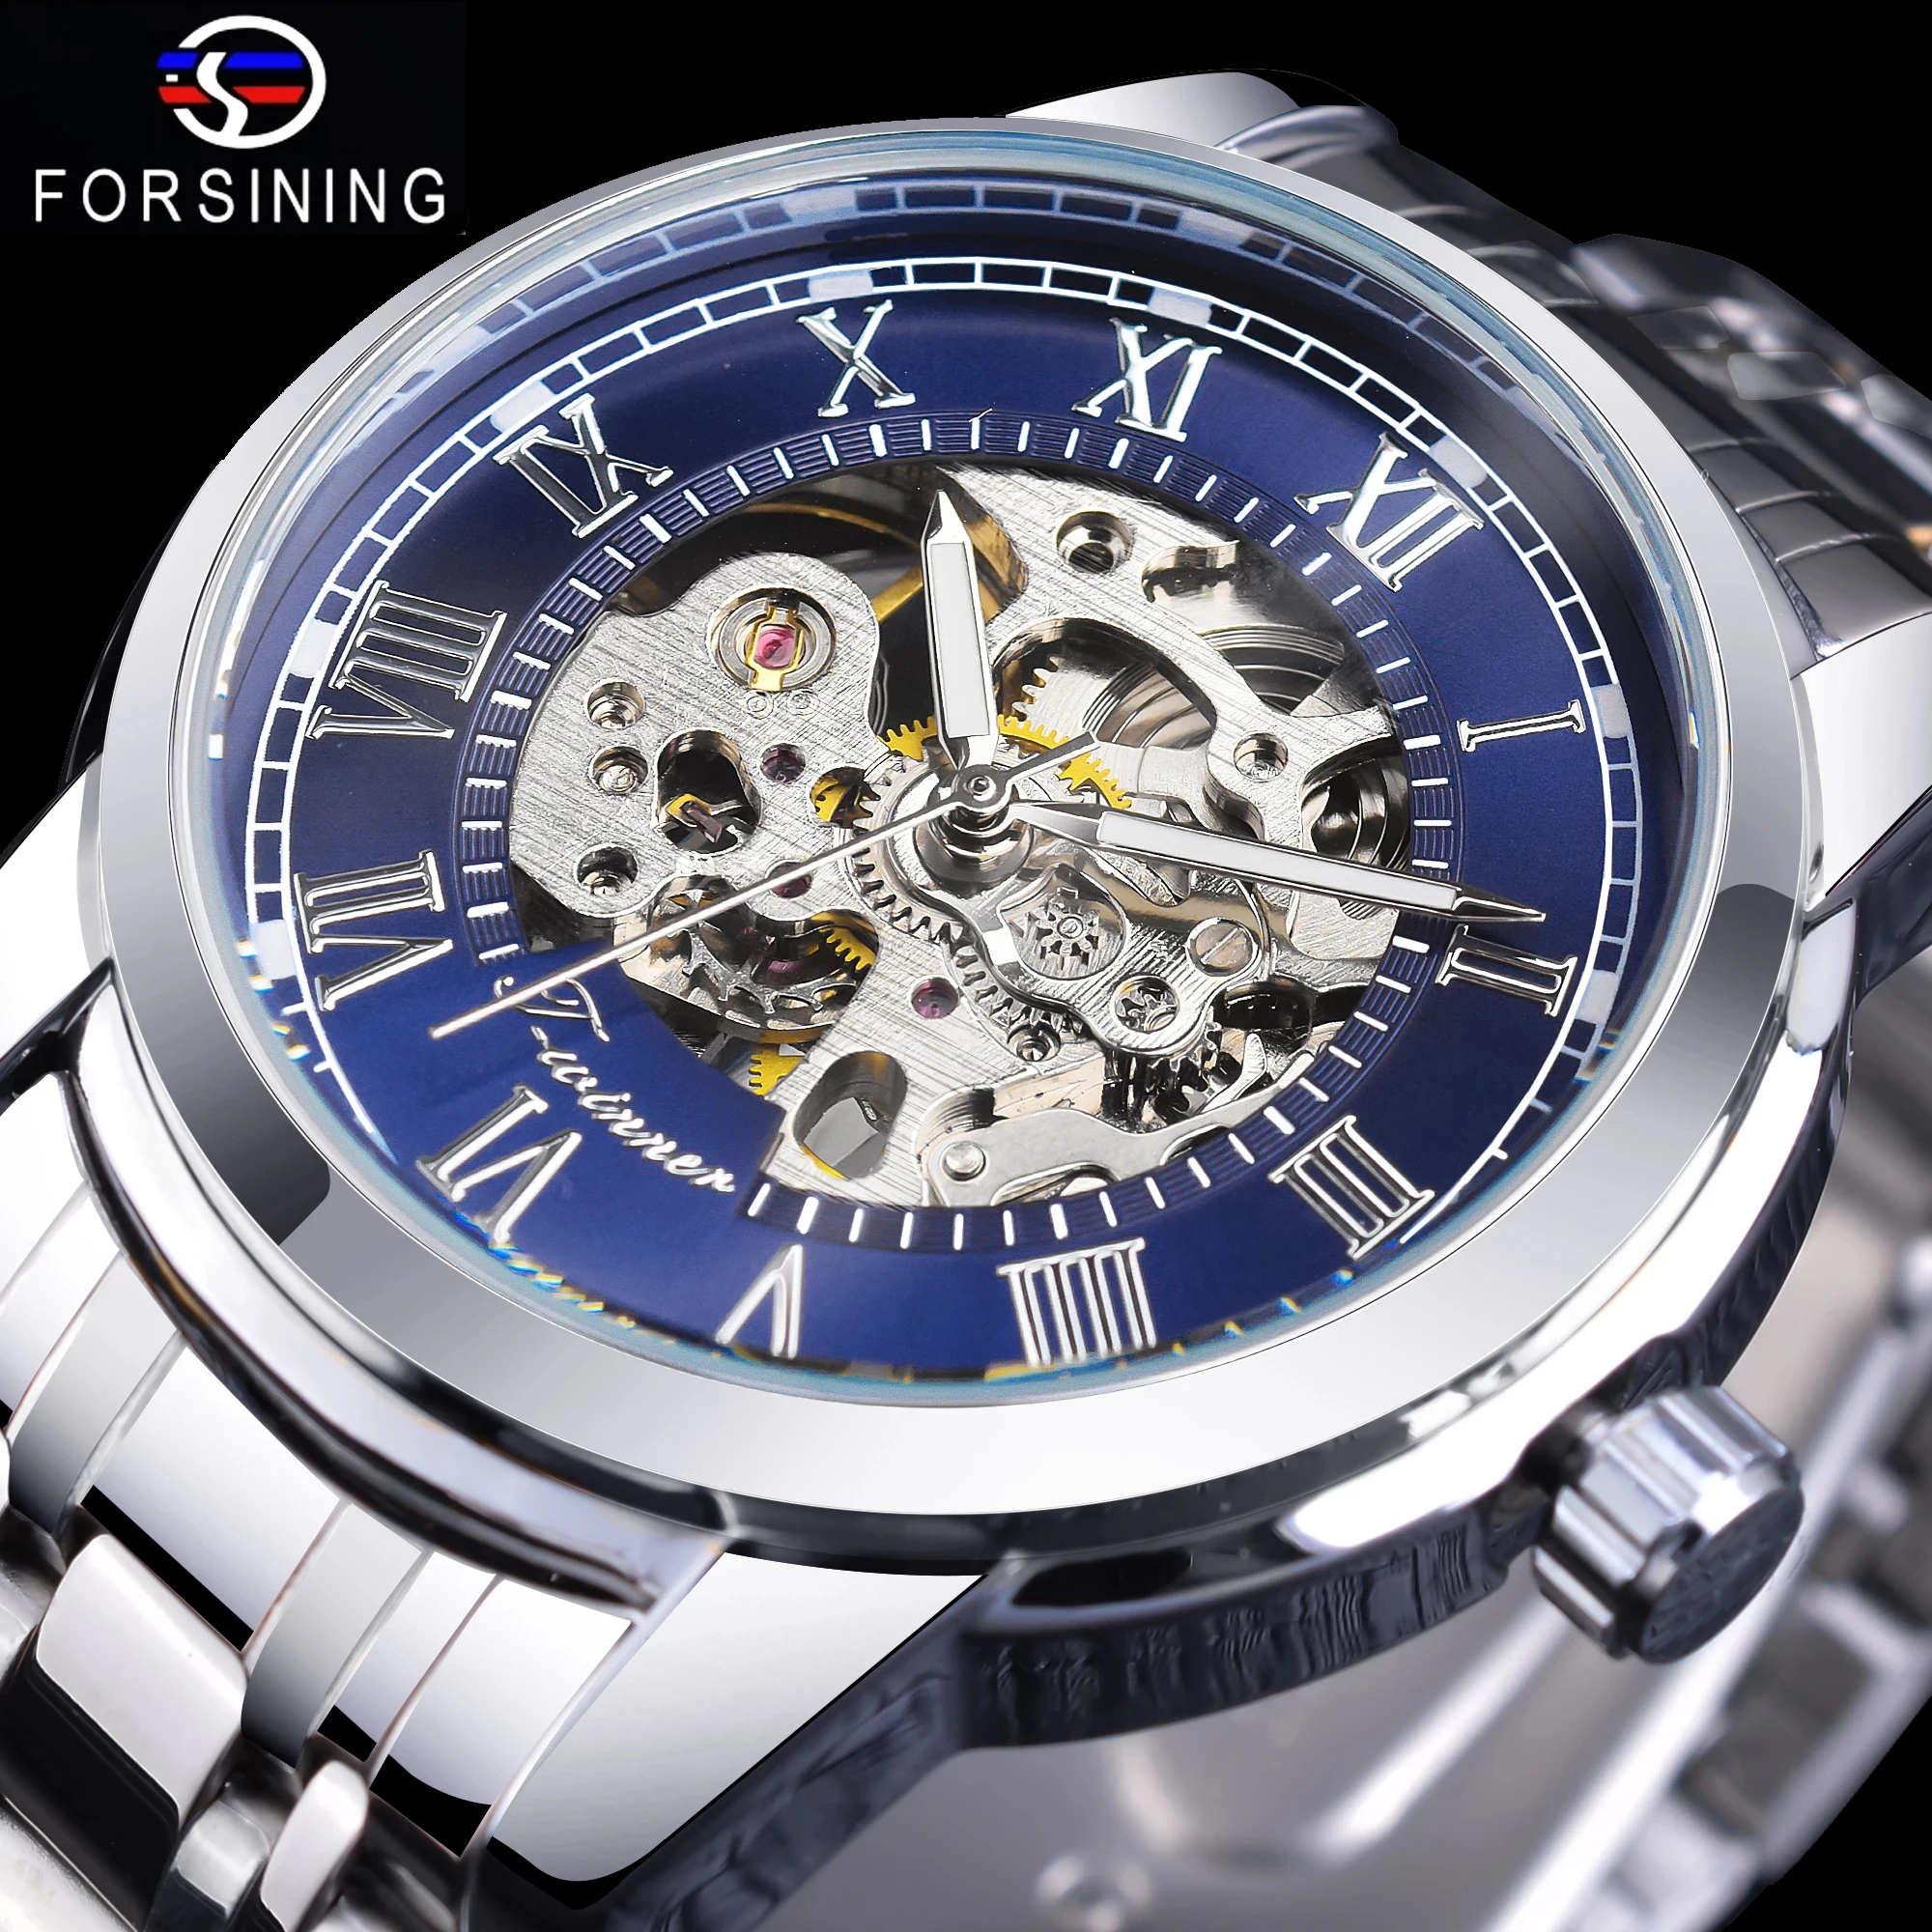 Forsining Hollow Open Work Blue Dial Silver Stainless Steel Waterproof Retro 3D Skeleton Automatic Mechanical Wrist Watch Clock men belts metal automatic buckle brand high quality leather belts for famous luxury work business strap cinto couro masculino